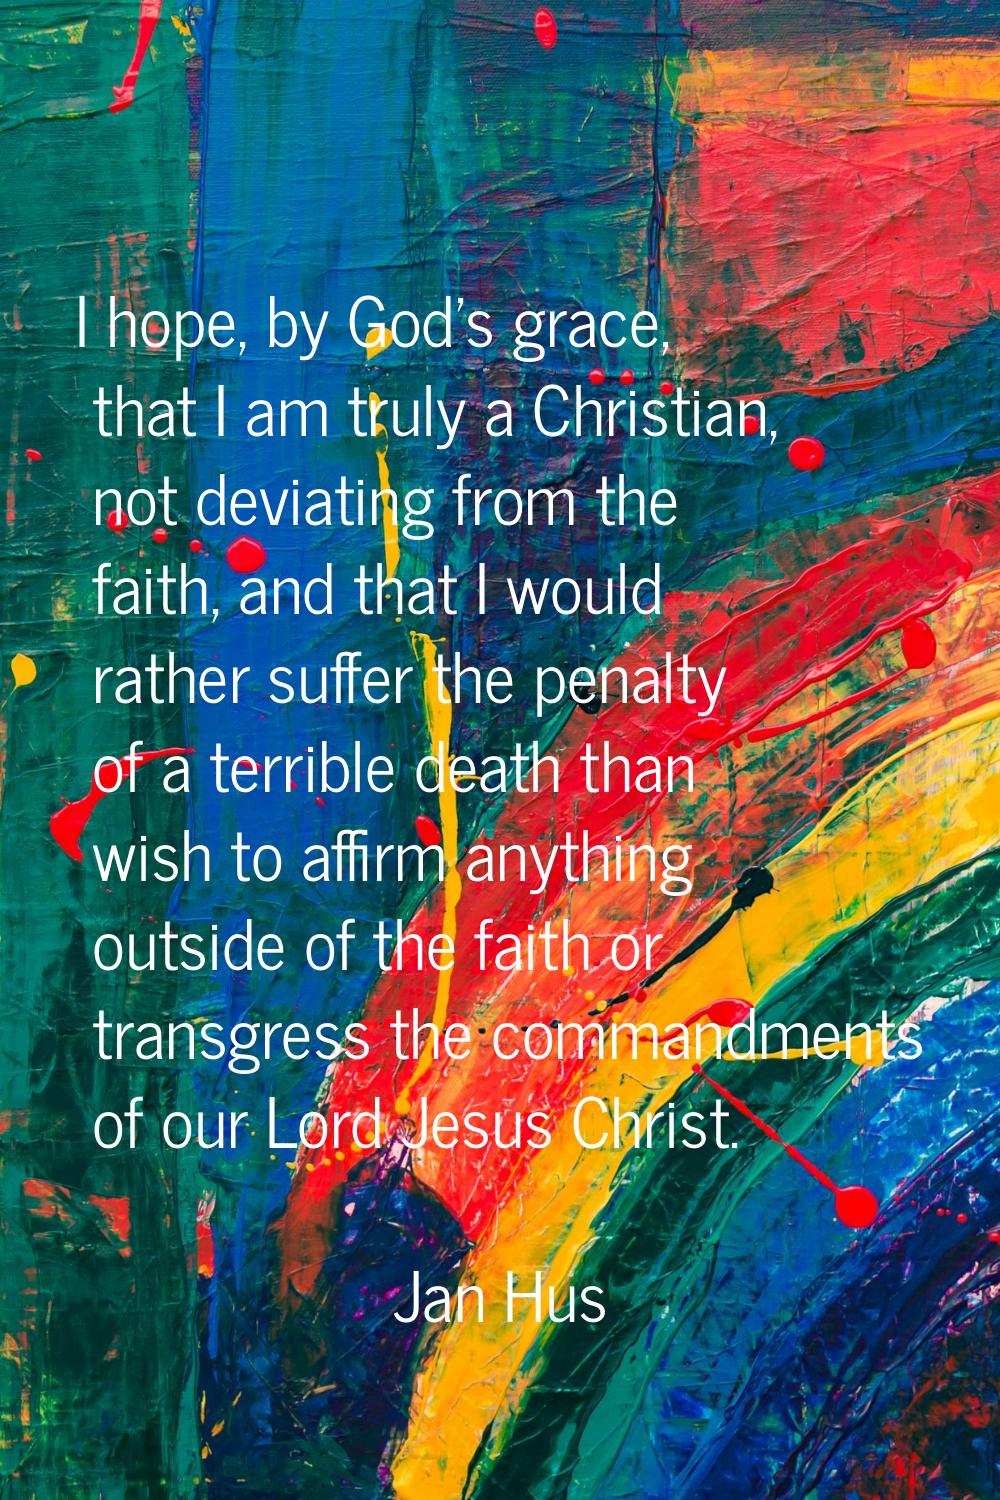 I hope, by God's grace, that I am truly a Christian, not deviating from the faith, and that I would